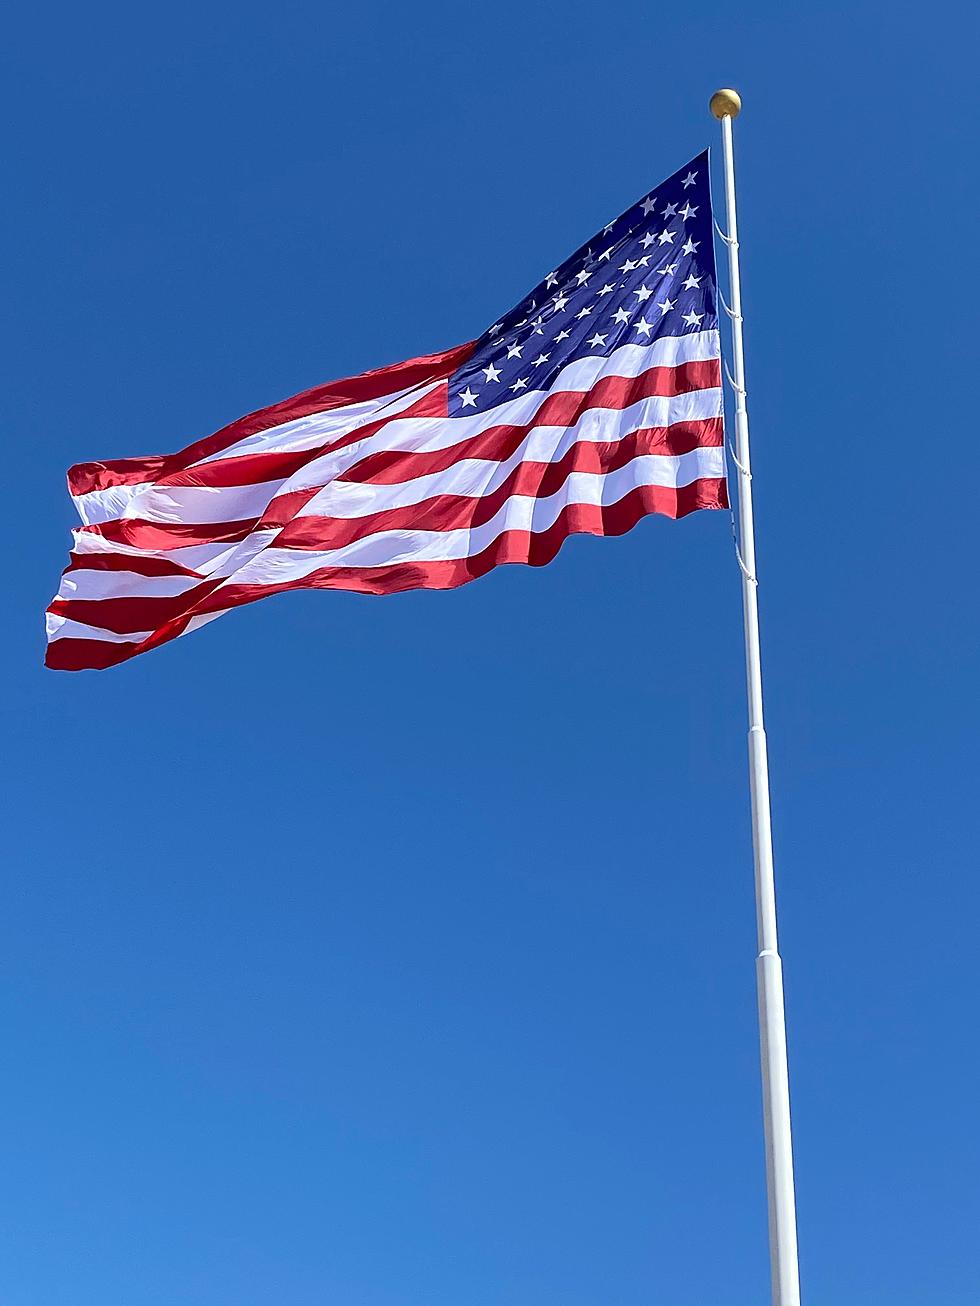 Why The Flag at El Paso's Old Glory Memorial Needs To Keep Flying